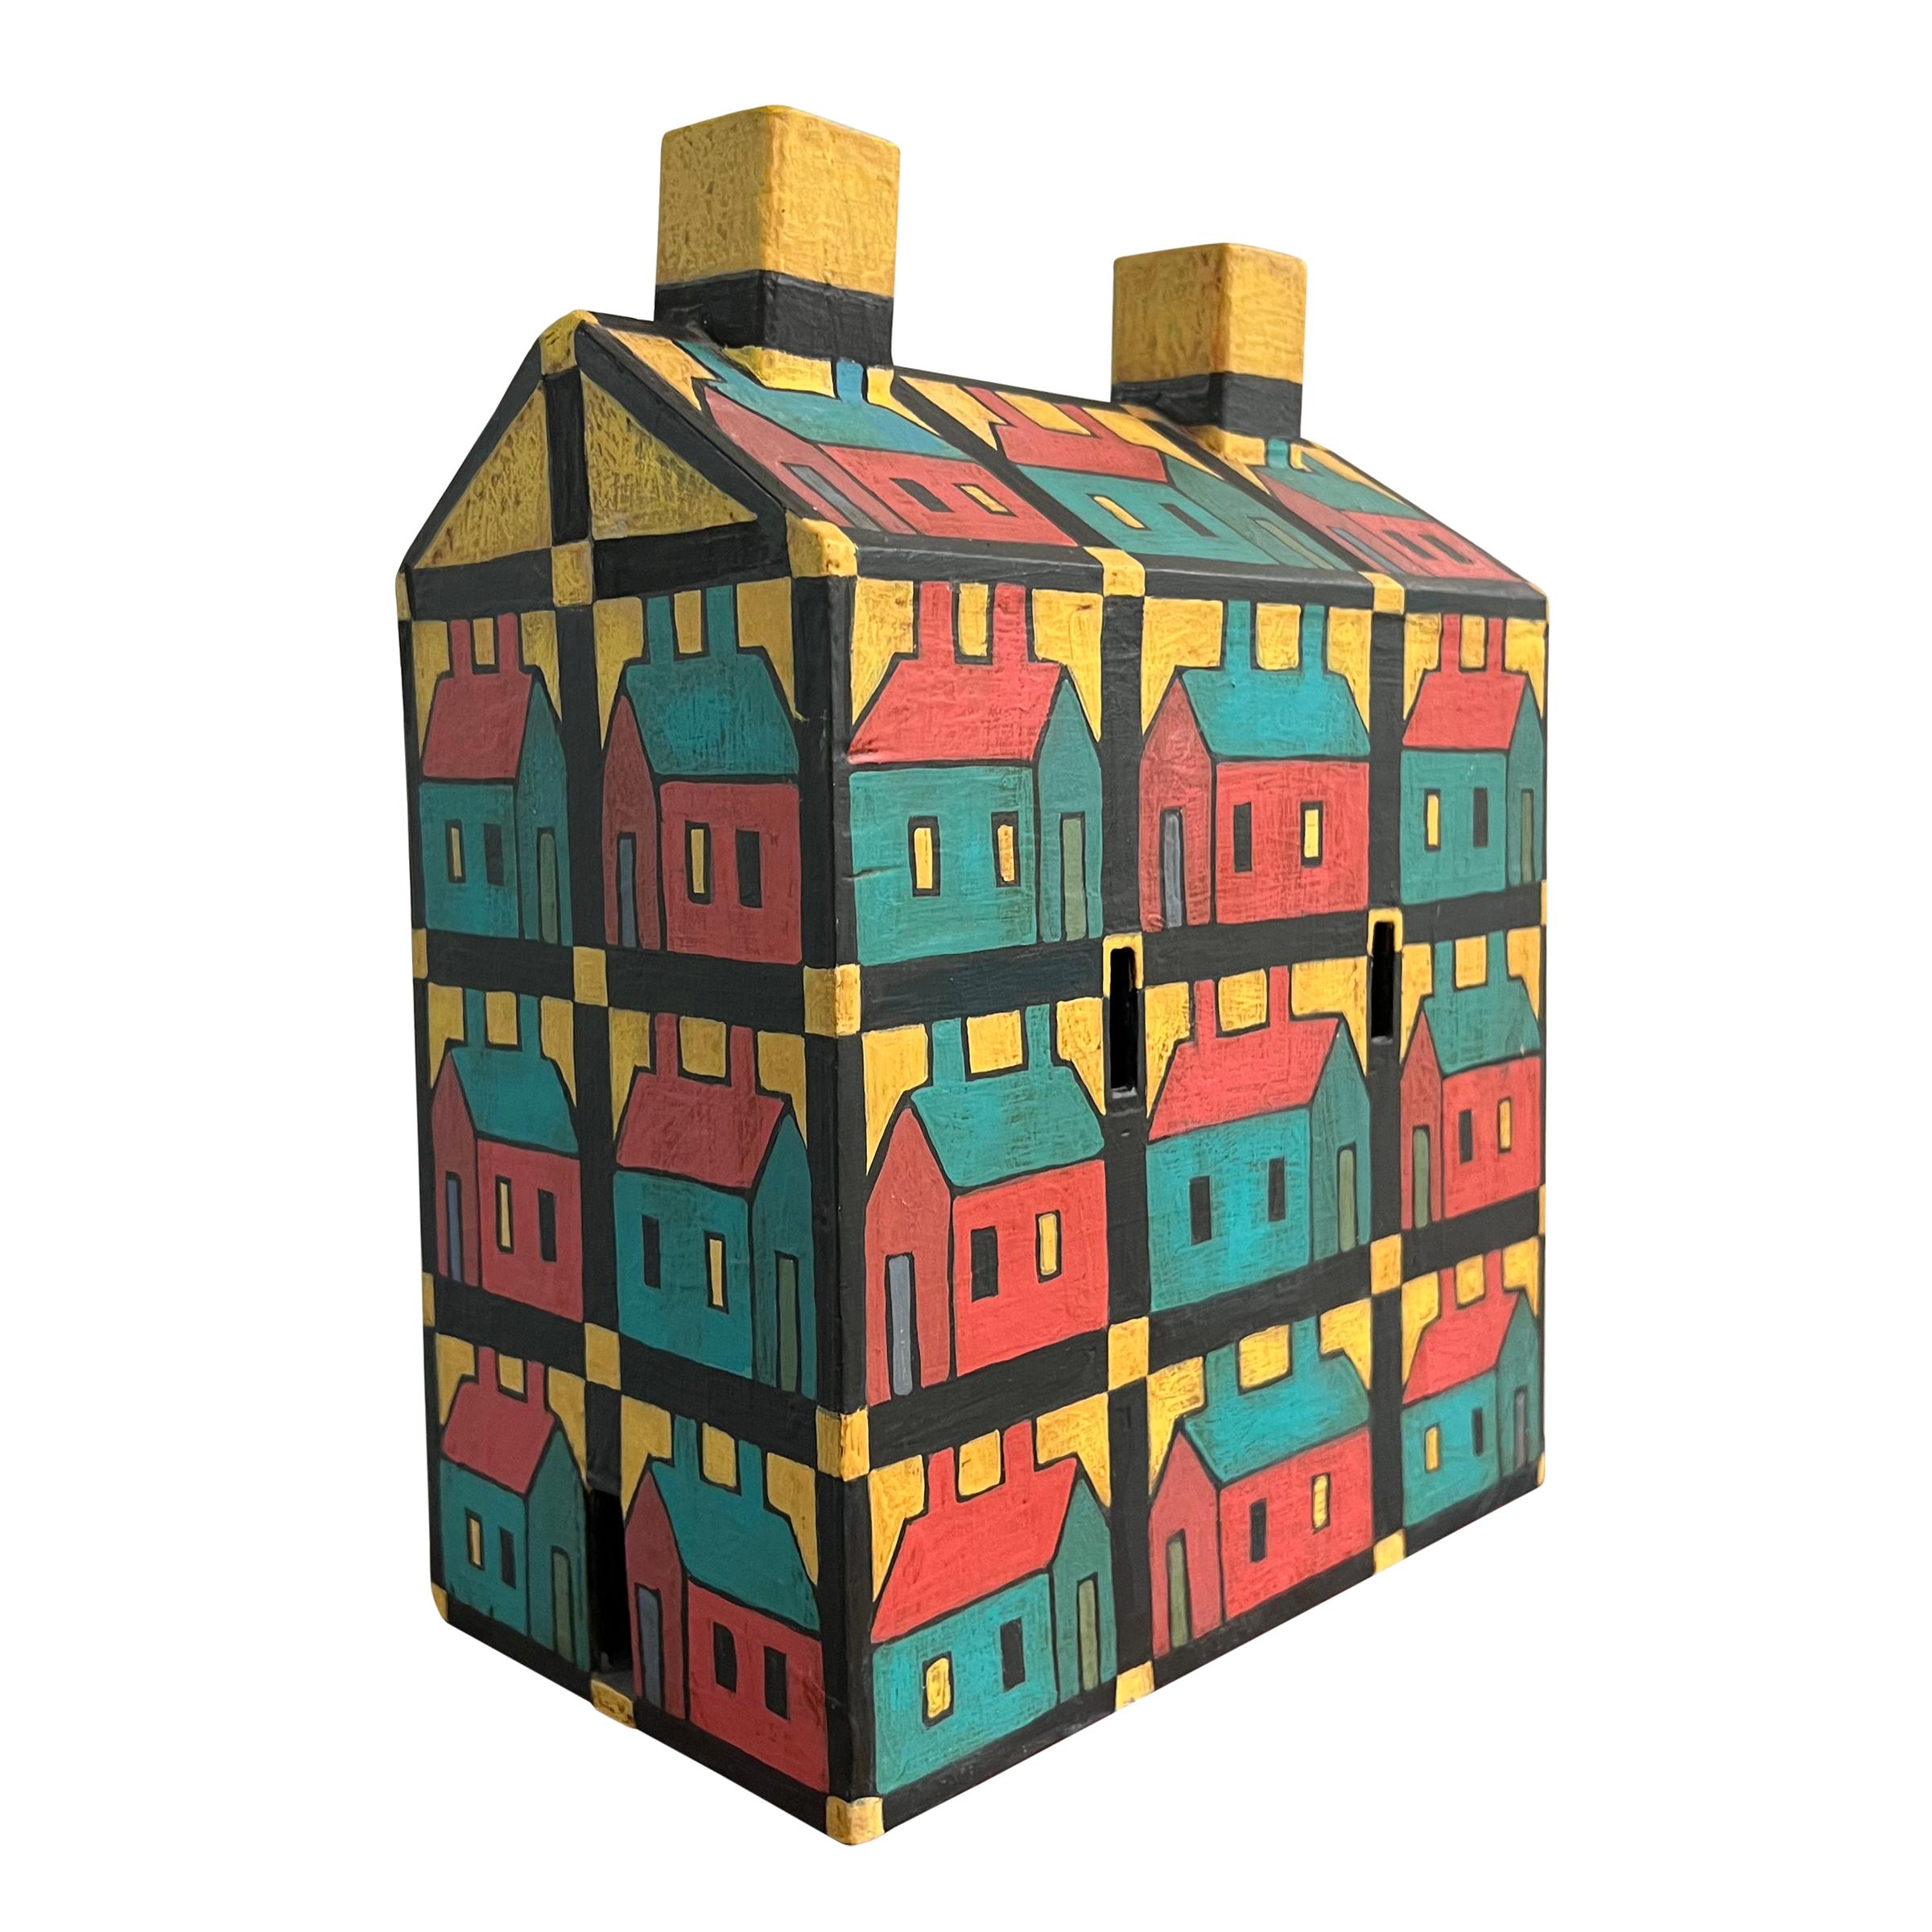 Hand-Painted American Folk Art House Sculpture For Sale